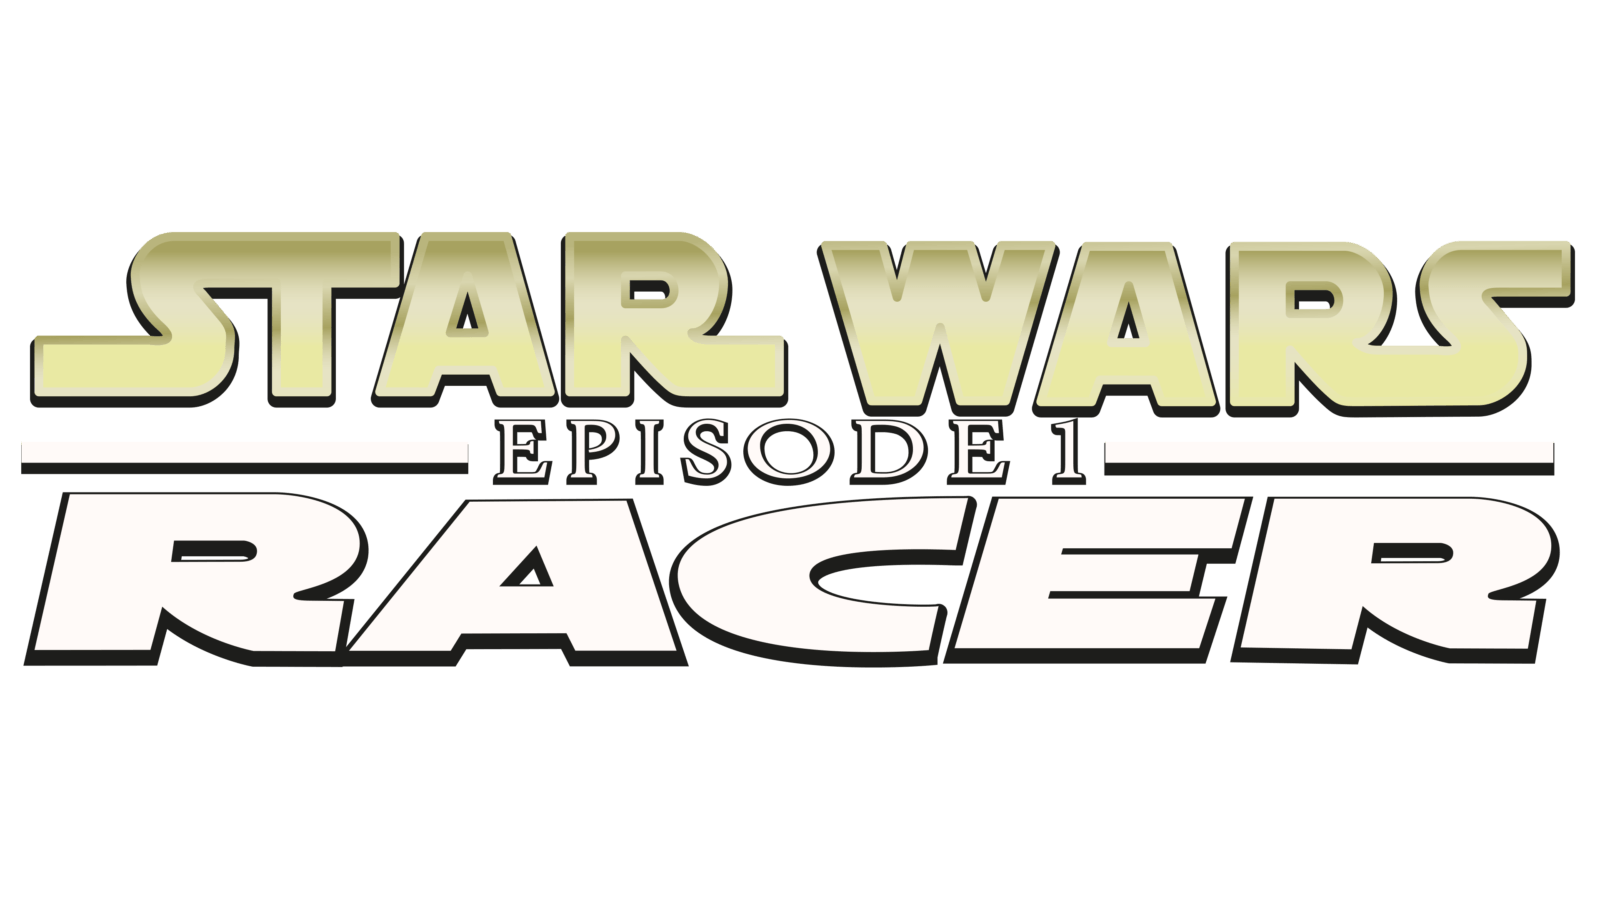 STAR WARS™ Episode I Racer Cheats. MGW: Game Cheats, Cheat Codes